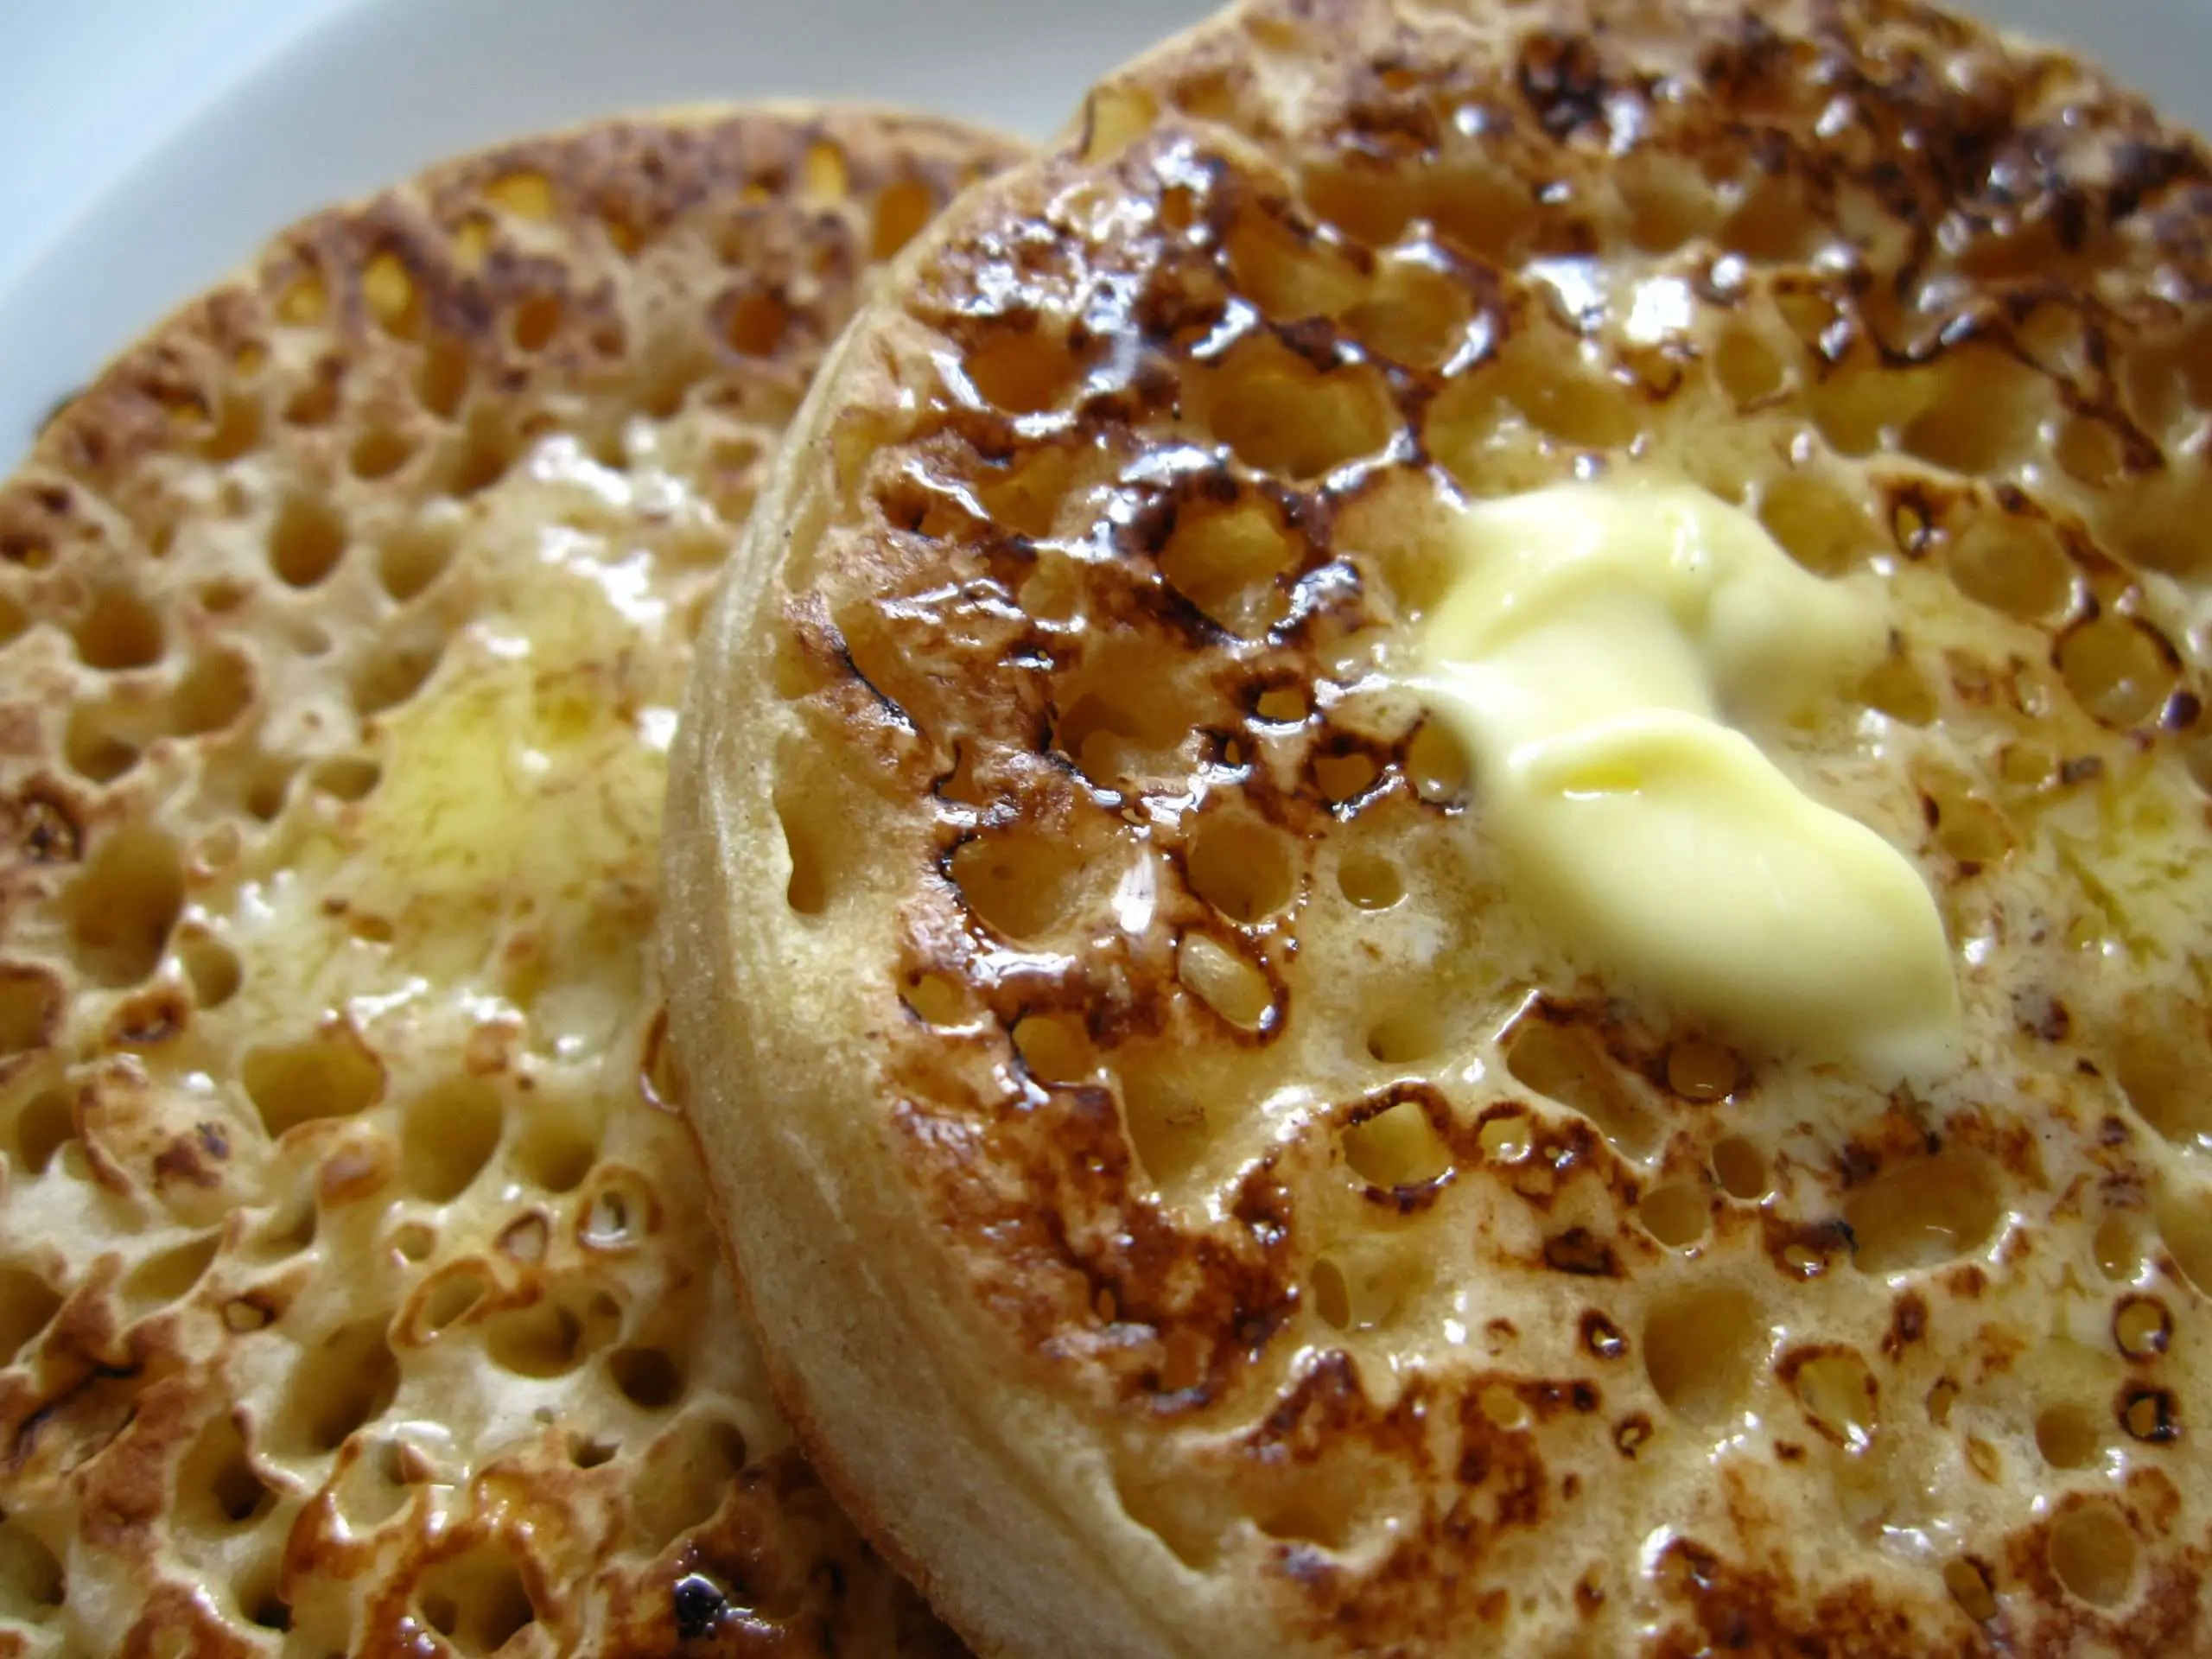 Two crumpets with butter